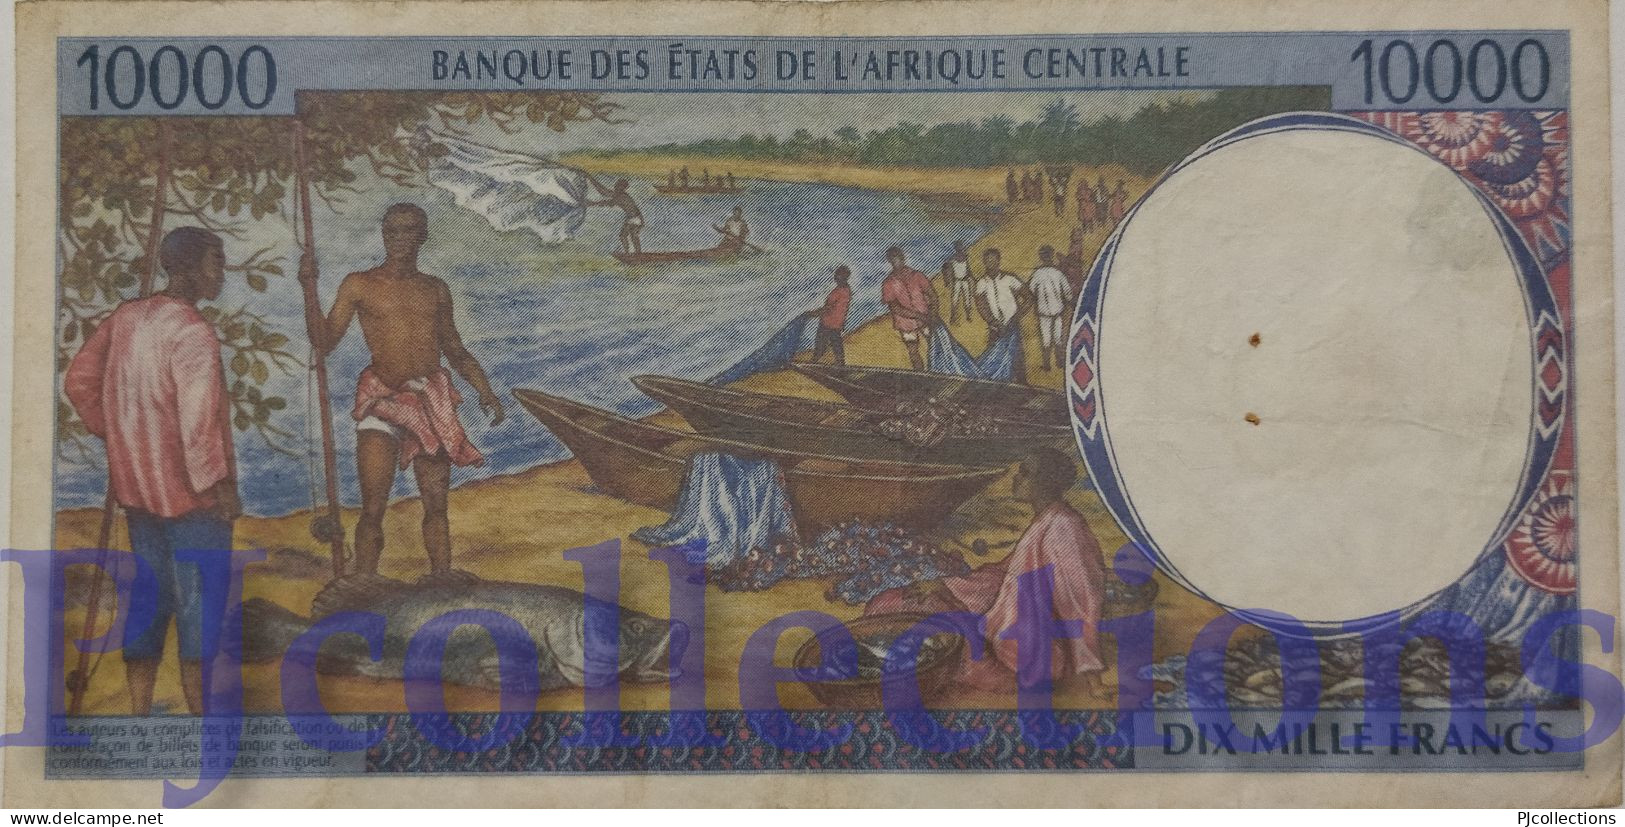 CENTRAL AFRICAN STATES 10000 FRANCS 1999 PICK 205Ee VF W/PIN HOLES - República Centroafricana